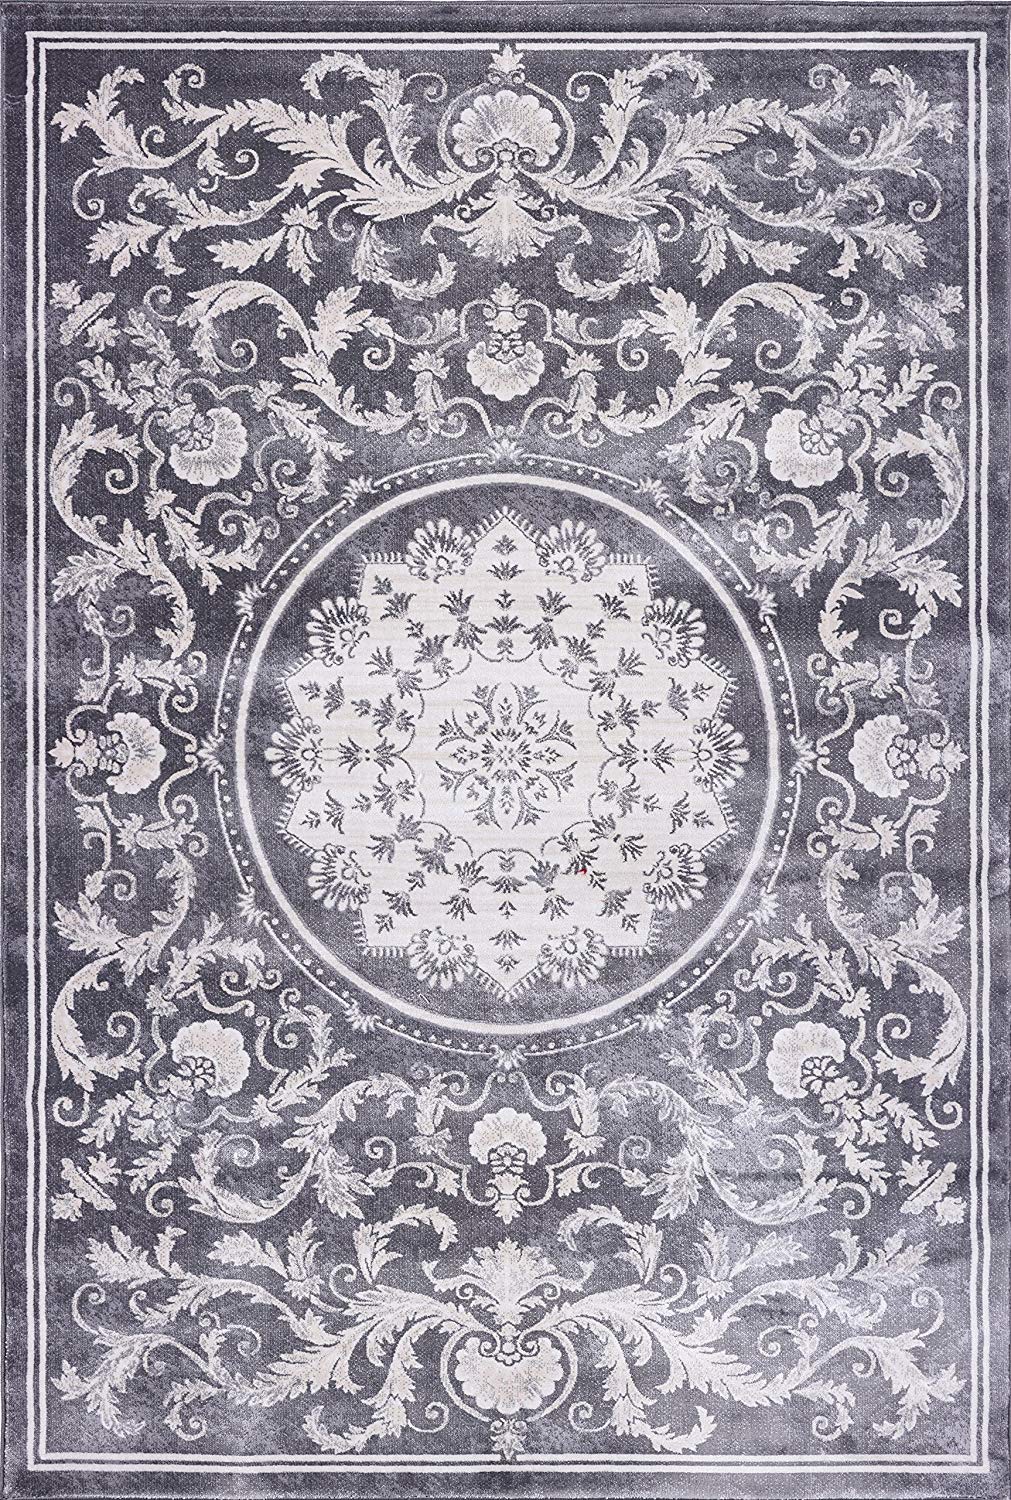 https://pierrecardinrugs.com/cdn/shop/products/area_rugs_8x10_area_rug_5x7_5x8_blue_luxury_bedroom_8x10_clearance_living_room_vintage_gray_grey_traditional_bohemian_kitchen_rugs_for_bedroom_living_room_abstract_rugs_area_patterns_1_25fb654b-1683-430d-a3d3-aaa933da2ba3_1024x.jpg?v=1530820093